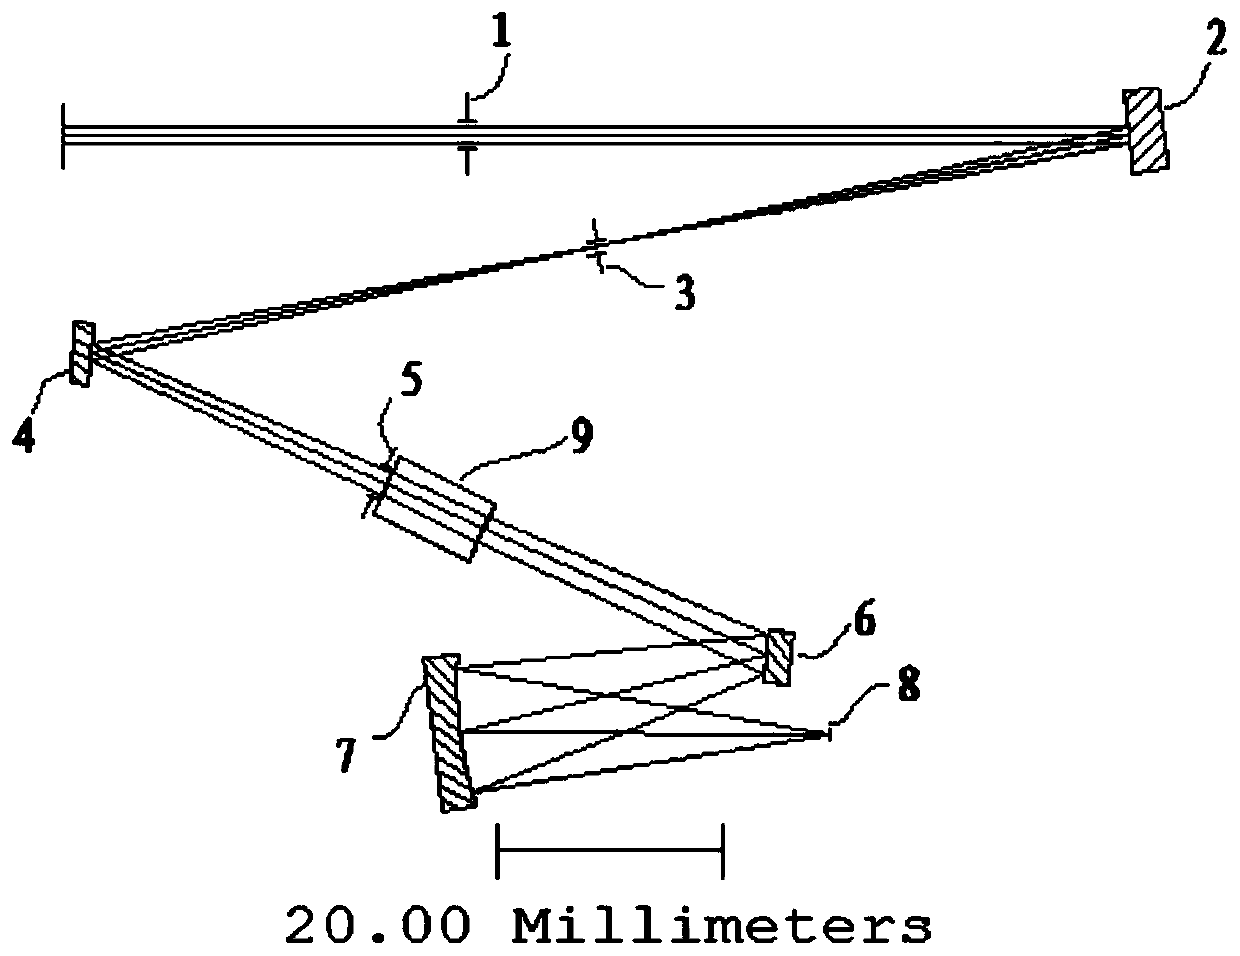 A small reflective off-axis telescopic system with wide field of view and large relative aperture